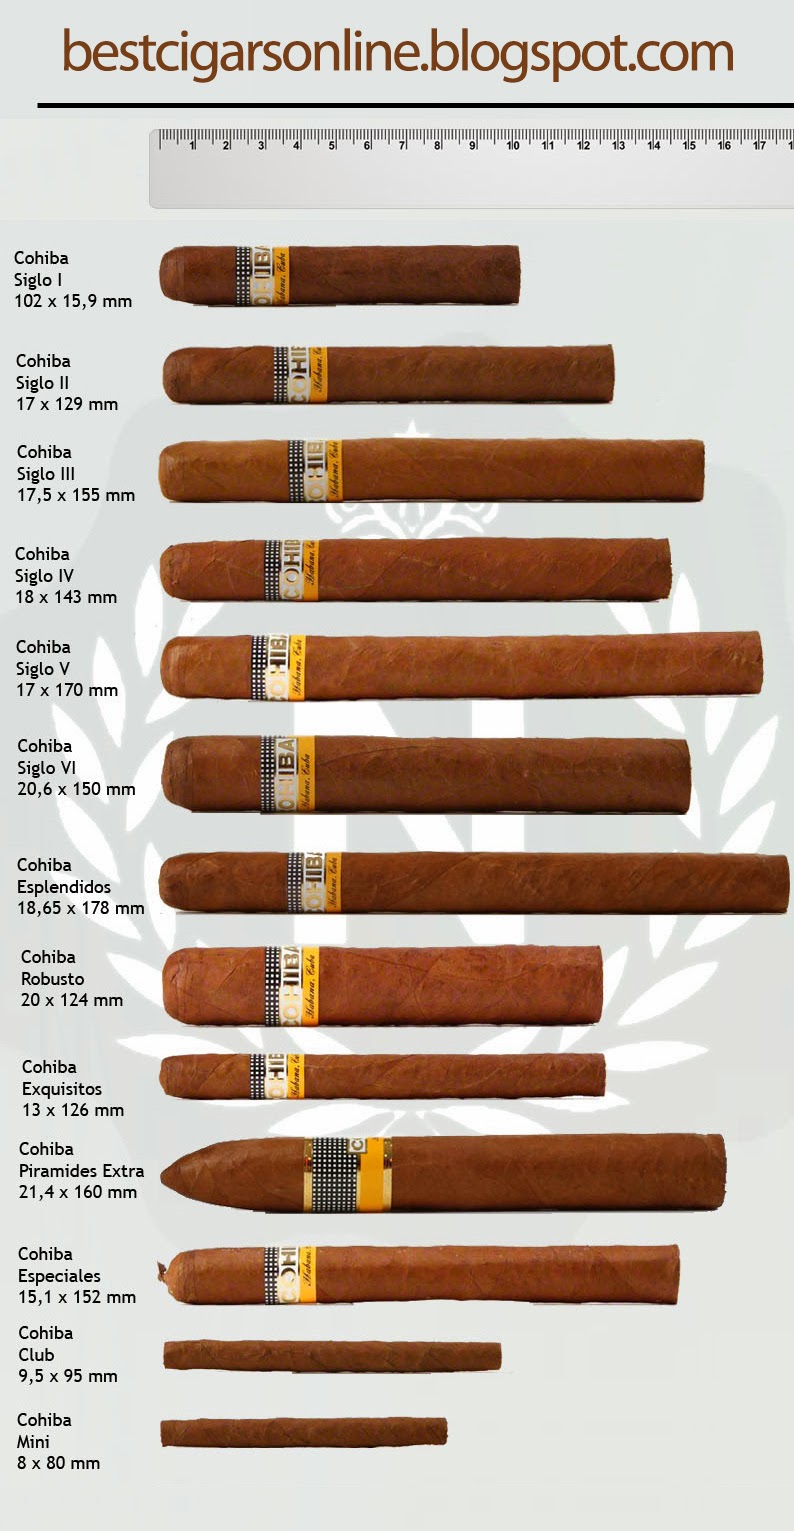 Best cigars brand: Why Try Cohiba Cigars?